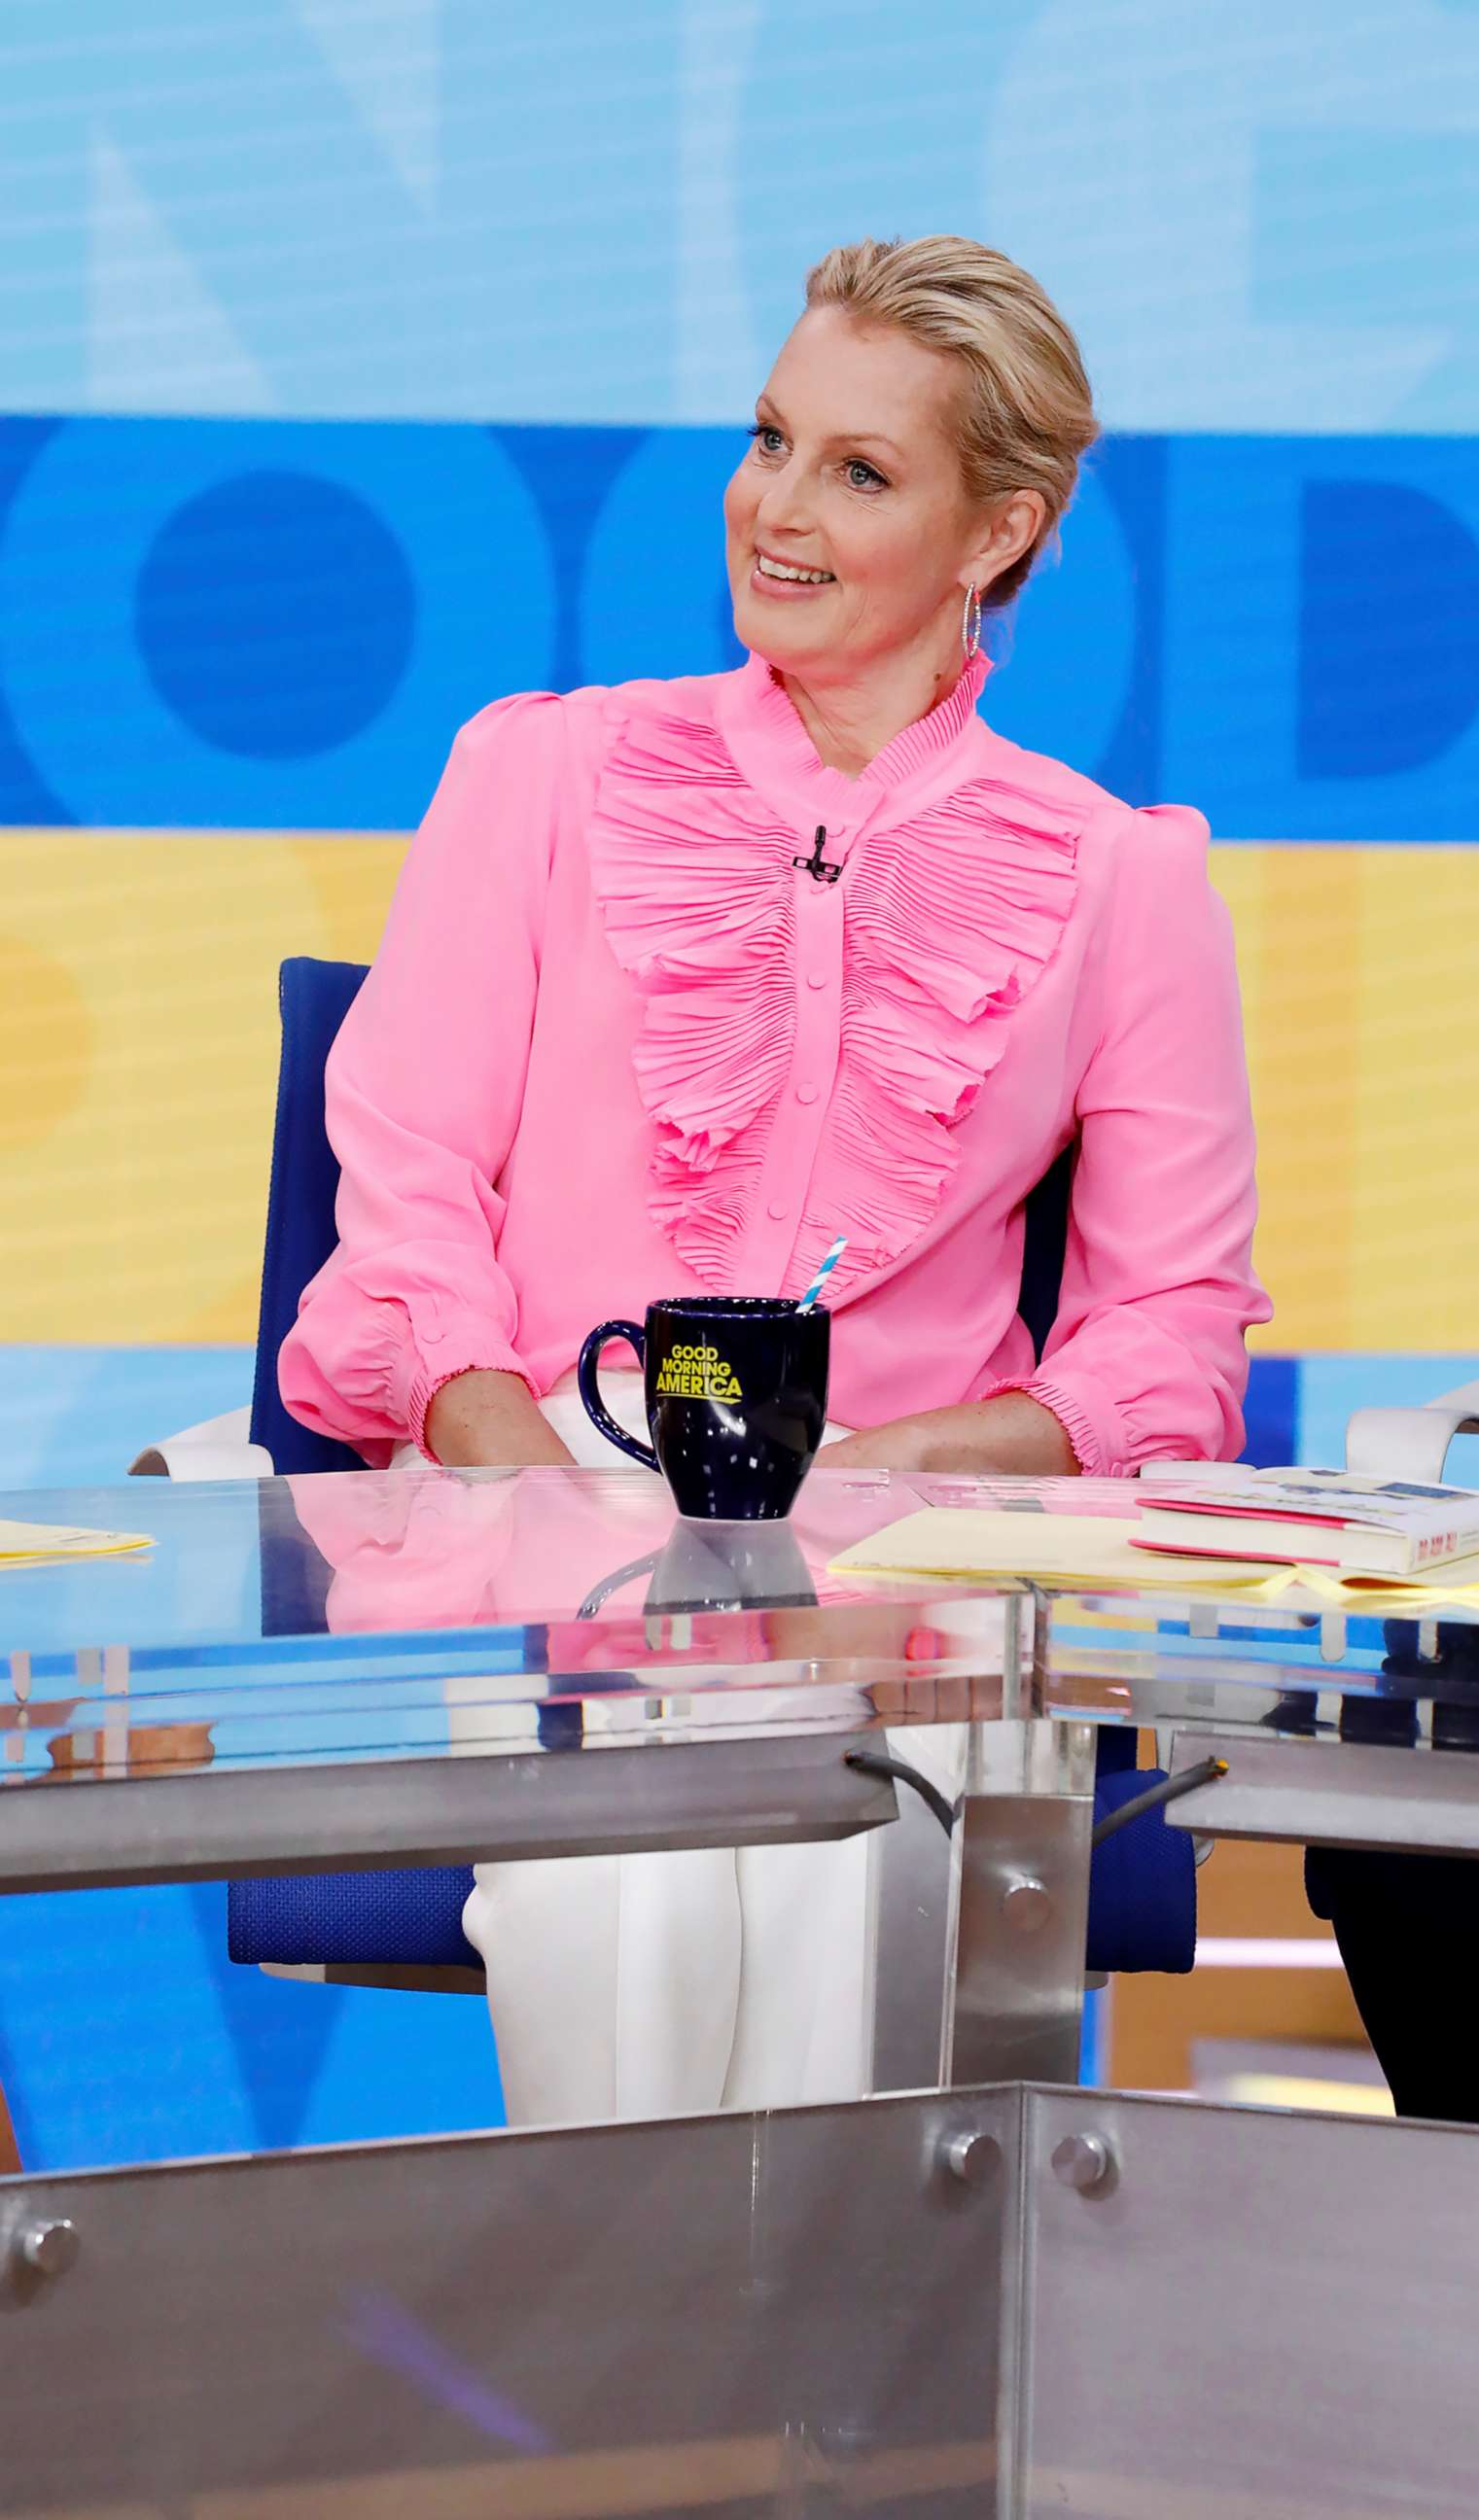 PHOTO: Author and actress Ali Wentworth discusses her new book, "Go Ask Ali."